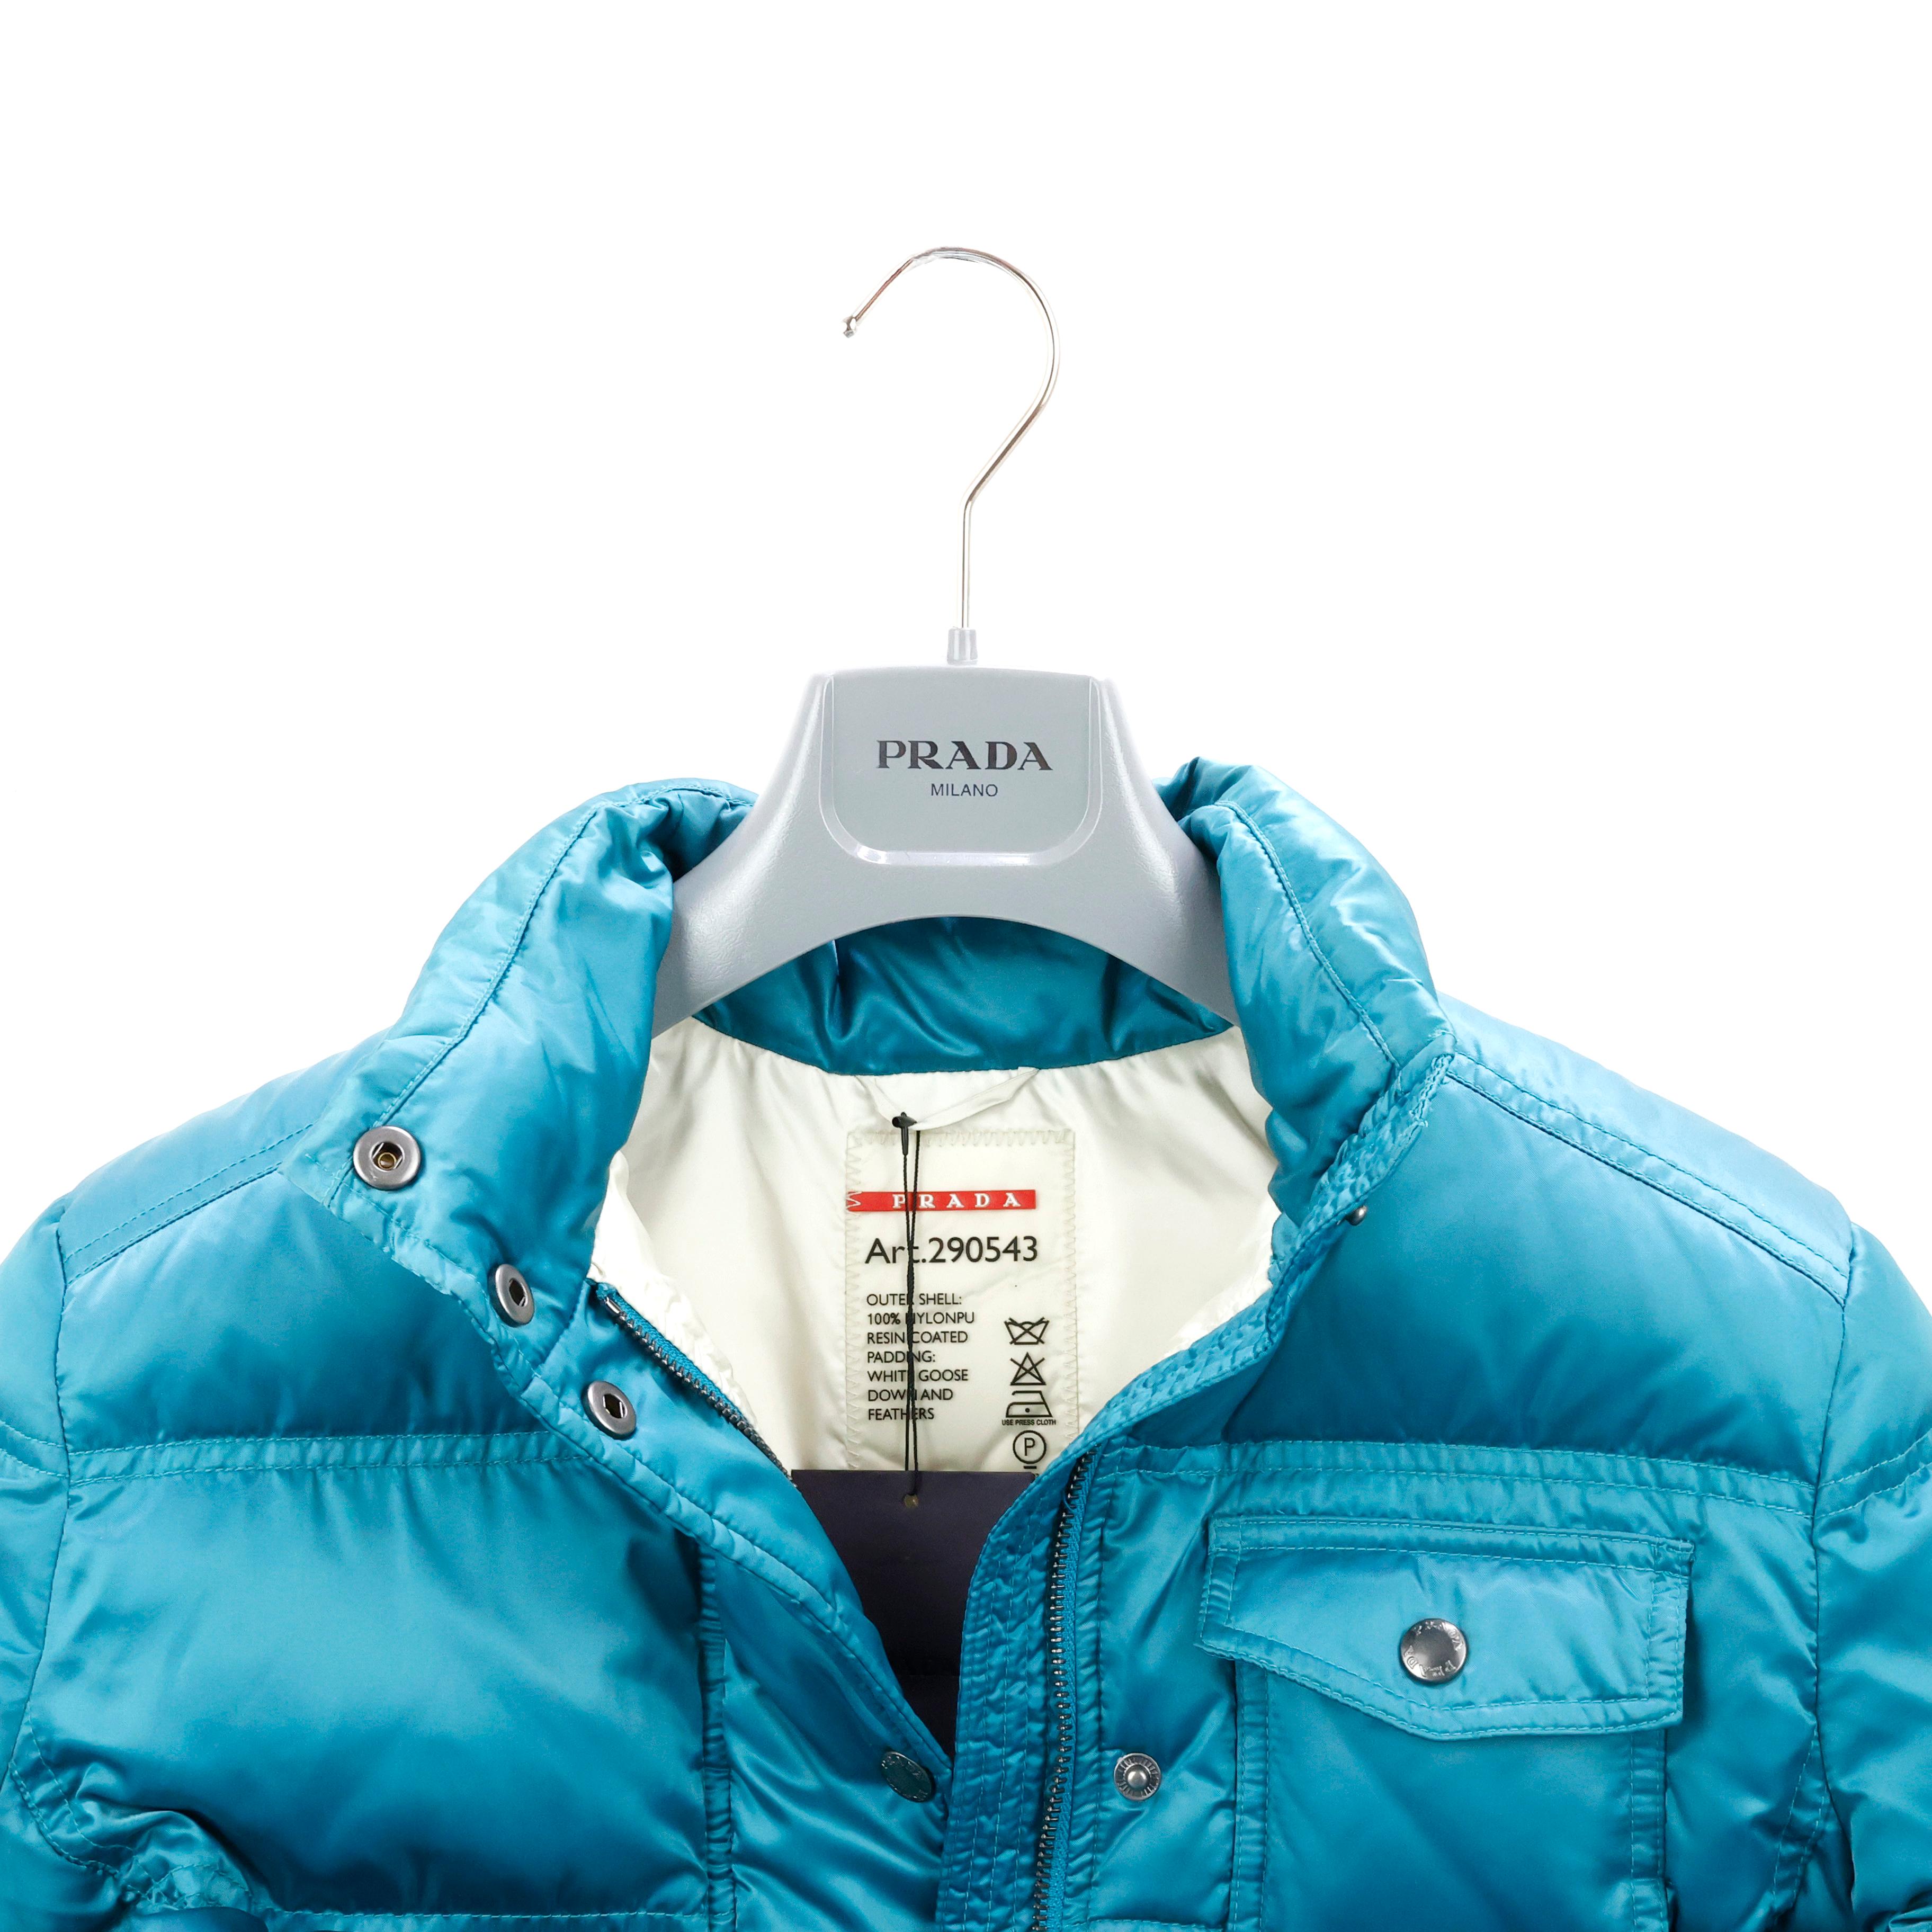 Prada Triangle Logo Puffer Jacket in Turquoise Satin For Sale 10